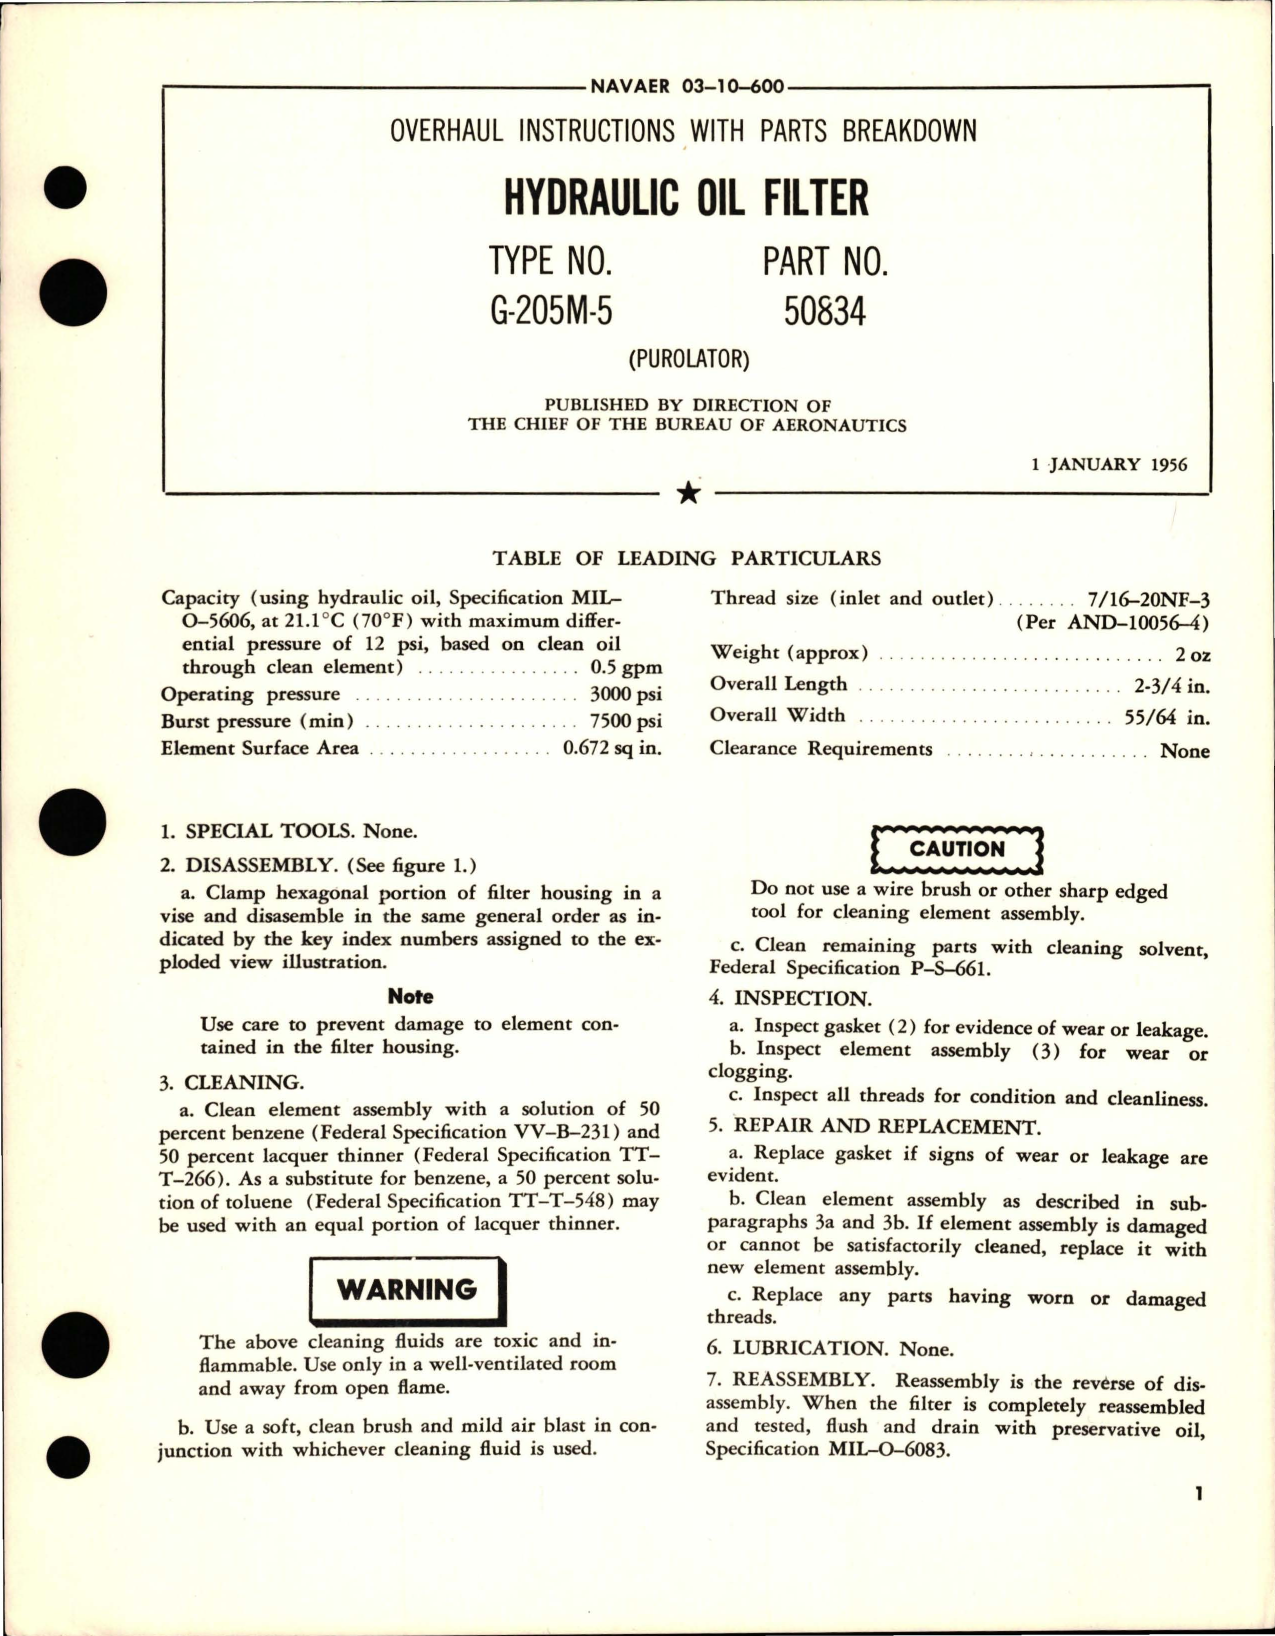 Sample page 1 from AirCorps Library document: Overhaul Instructions with Parts Breakdown for Hydraulic Oil Filter - Type G-205M-5, Part 50834 